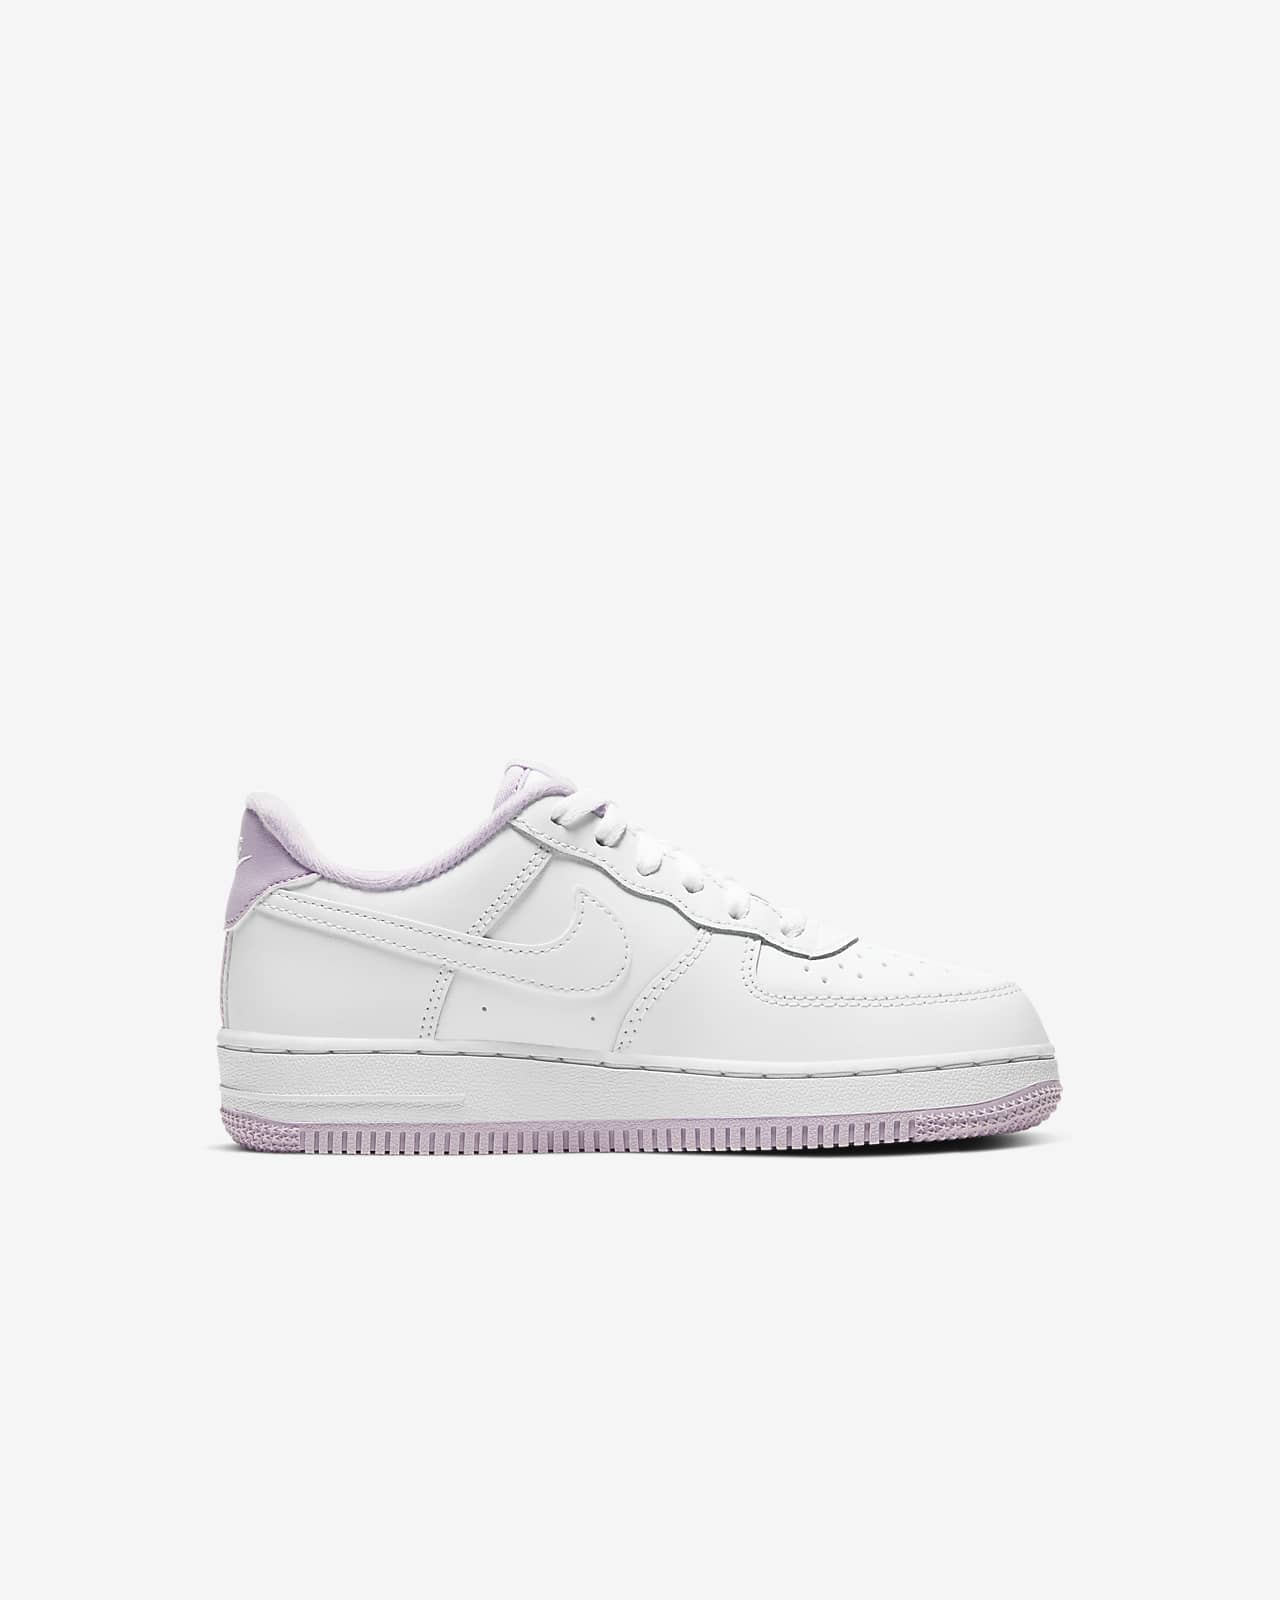 air force one iced lilac